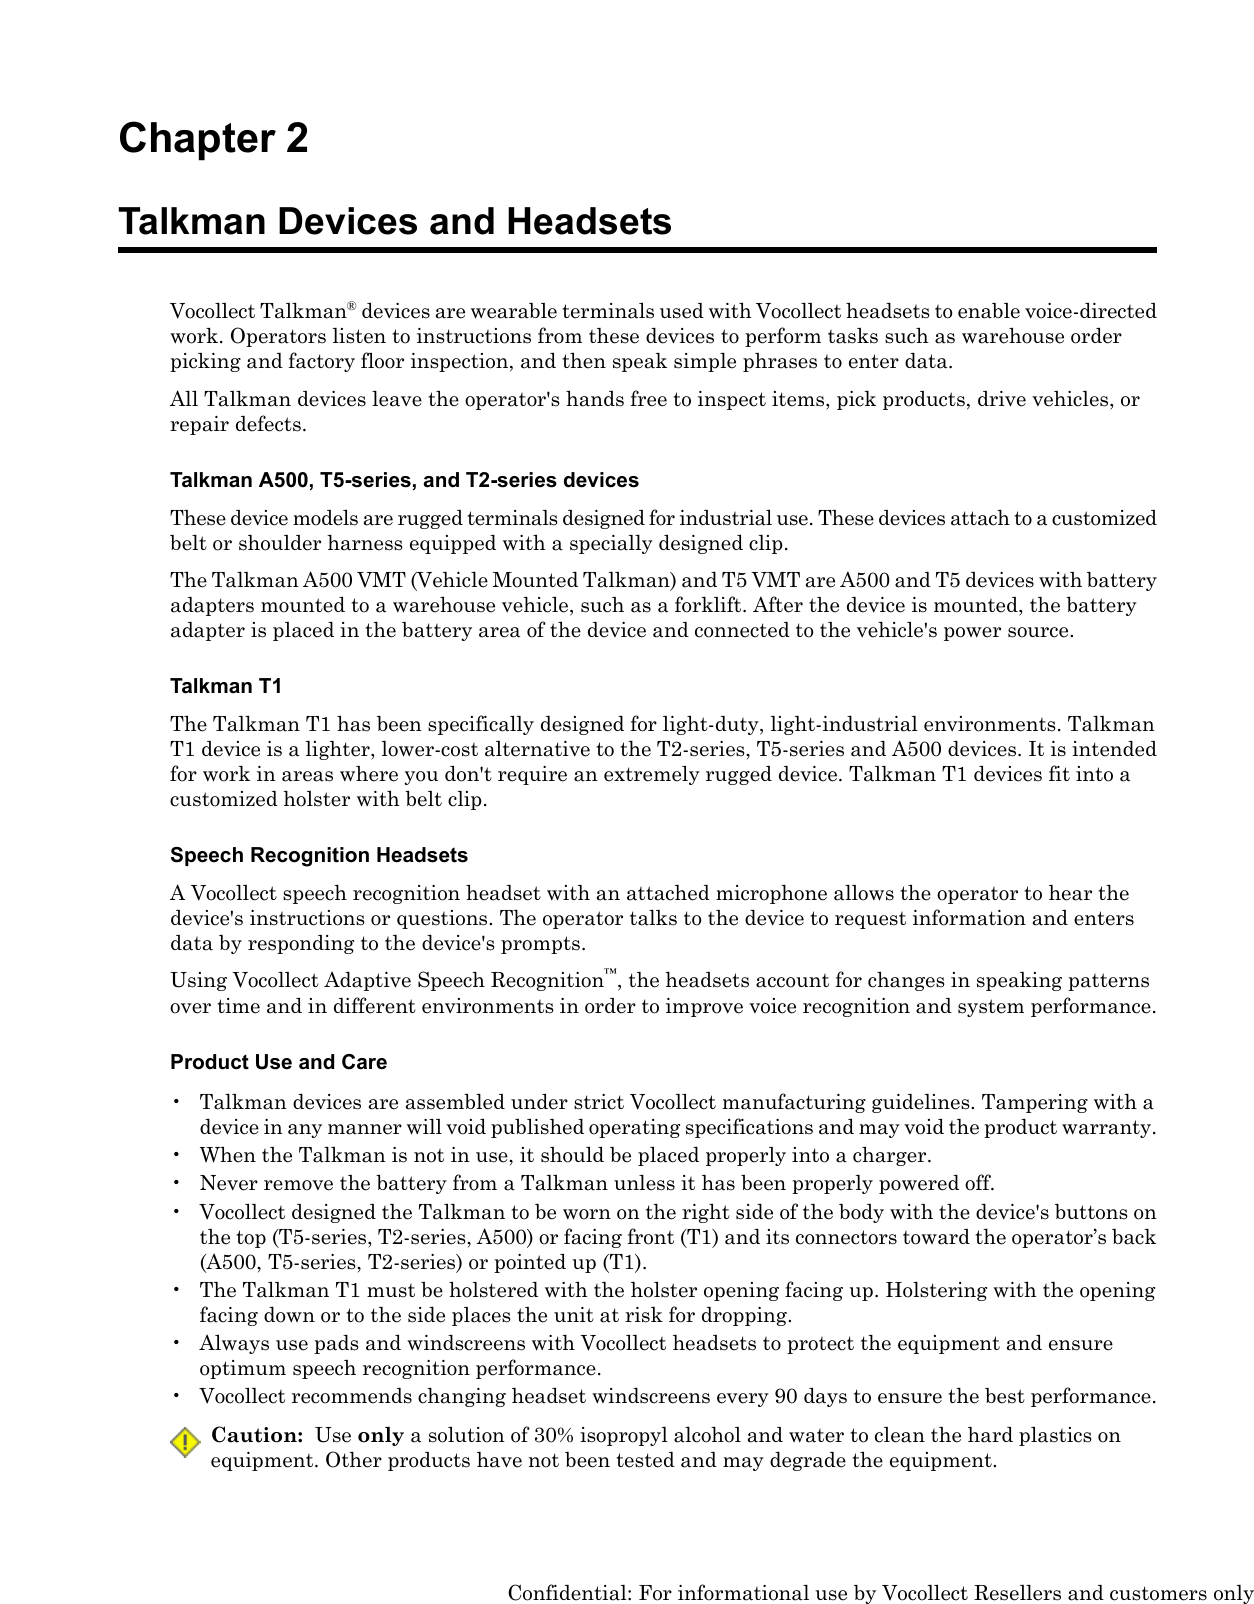 Chapter 2Talkman Devices and HeadsetsVocollect Talkman®devices are wearable terminals used with Vocollect headsets to enable voice-directedwork. Operators listen to instructions from these devices to perform tasks such as warehouse orderpicking and factory floor inspection, and then speak simple phrases to enter data.All Talkman devices leave the operator&apos;s hands free to inspect items, pick products, drive vehicles, orrepair defects.Talkman A500, T5-series, and T2-series devicesThese device models are rugged terminals designed for industrial use. These devices attach to a customizedbelt or shoulder harness equipped with a specially designed clip.The Talkman A500 VMT (Vehicle Mounted Talkman) and T5 VMT are A500 and T5 devices with batteryadapters mounted to a warehouse vehicle, such as a forklift. After the device is mounted, the batteryadapter is placed in the battery area of the device and connected to the vehicle&apos;s power source.Talkman T1The Talkman T1 has been specifically designed for light-duty, light-industrial environments. TalkmanT1 device is a lighter, lower-cost alternative to the T2-series, T5-series and A500 devices. It is intendedfor work in areas where you don&apos;t require an extremely rugged device. Talkman T1 devices fit into acustomized holster with belt clip.Speech Recognition HeadsetsA Vocollect speech recognition headset with an attached microphone allows the operator to hear thedevice&apos;s instructions or questions. The operator talks to the device to request information and entersdata by responding to the device&apos;s prompts.Using Vocollect Adaptive Speech Recognition™, the headsets account for changes in speaking patternsover time and in different environments in order to improve voice recognition and system performance.Product Use and Care• Talkman devices are assembled under strict Vocollect manufacturing guidelines. Tampering with adevice in any manner will void published operating specifications and may void the product warranty.• When the Talkman is not in use, it should be placed properly into a charger.• Never remove the battery from a Talkman unless it has been properly powered off.• Vocollect designed the Talkman to be worn on the right side of the body with the device&apos;s buttons onthe top (T5-series, T2-series, A500) or facing front (T1) and its connectors toward the operator’s back(A500, T5-series, T2-series) or pointed up (T1).• The Talkman T1 must be holstered with the holster opening facing up. Holstering with the openingfacing down or to the side places the unit at risk for dropping.• Always use pads and windscreens with Vocollect headsets to protect the equipment and ensureoptimum speech recognition performance.• Vocollect recommends changing headset windscreens every 90 days to ensure the best performance.Caution: Use only a solution of 30% isopropyl alcohol and water to clean the hard plastics onequipment. Other products have not been tested and may degrade the equipment.Confidential: For informational use by Vocollect Resellers and customers only